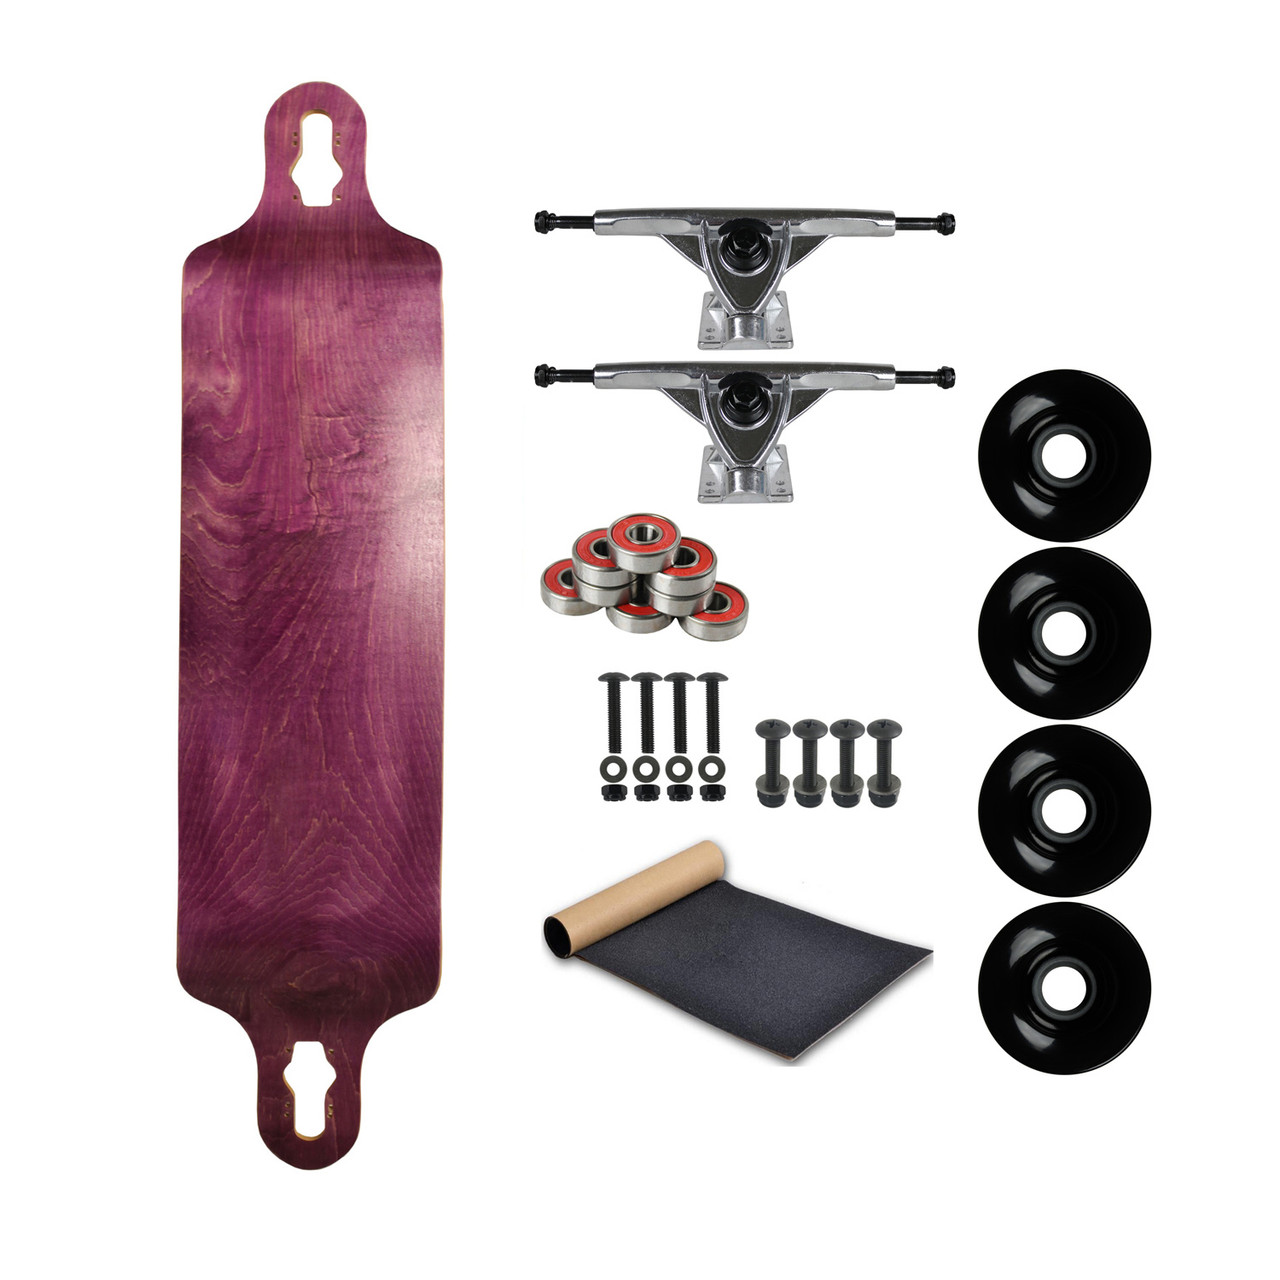 Vejhus Guinness mikrocomputer Moose Longboard Complete 9.75" x 41.25" Double Drop (Down/Through) Purple  (All Parts Included)